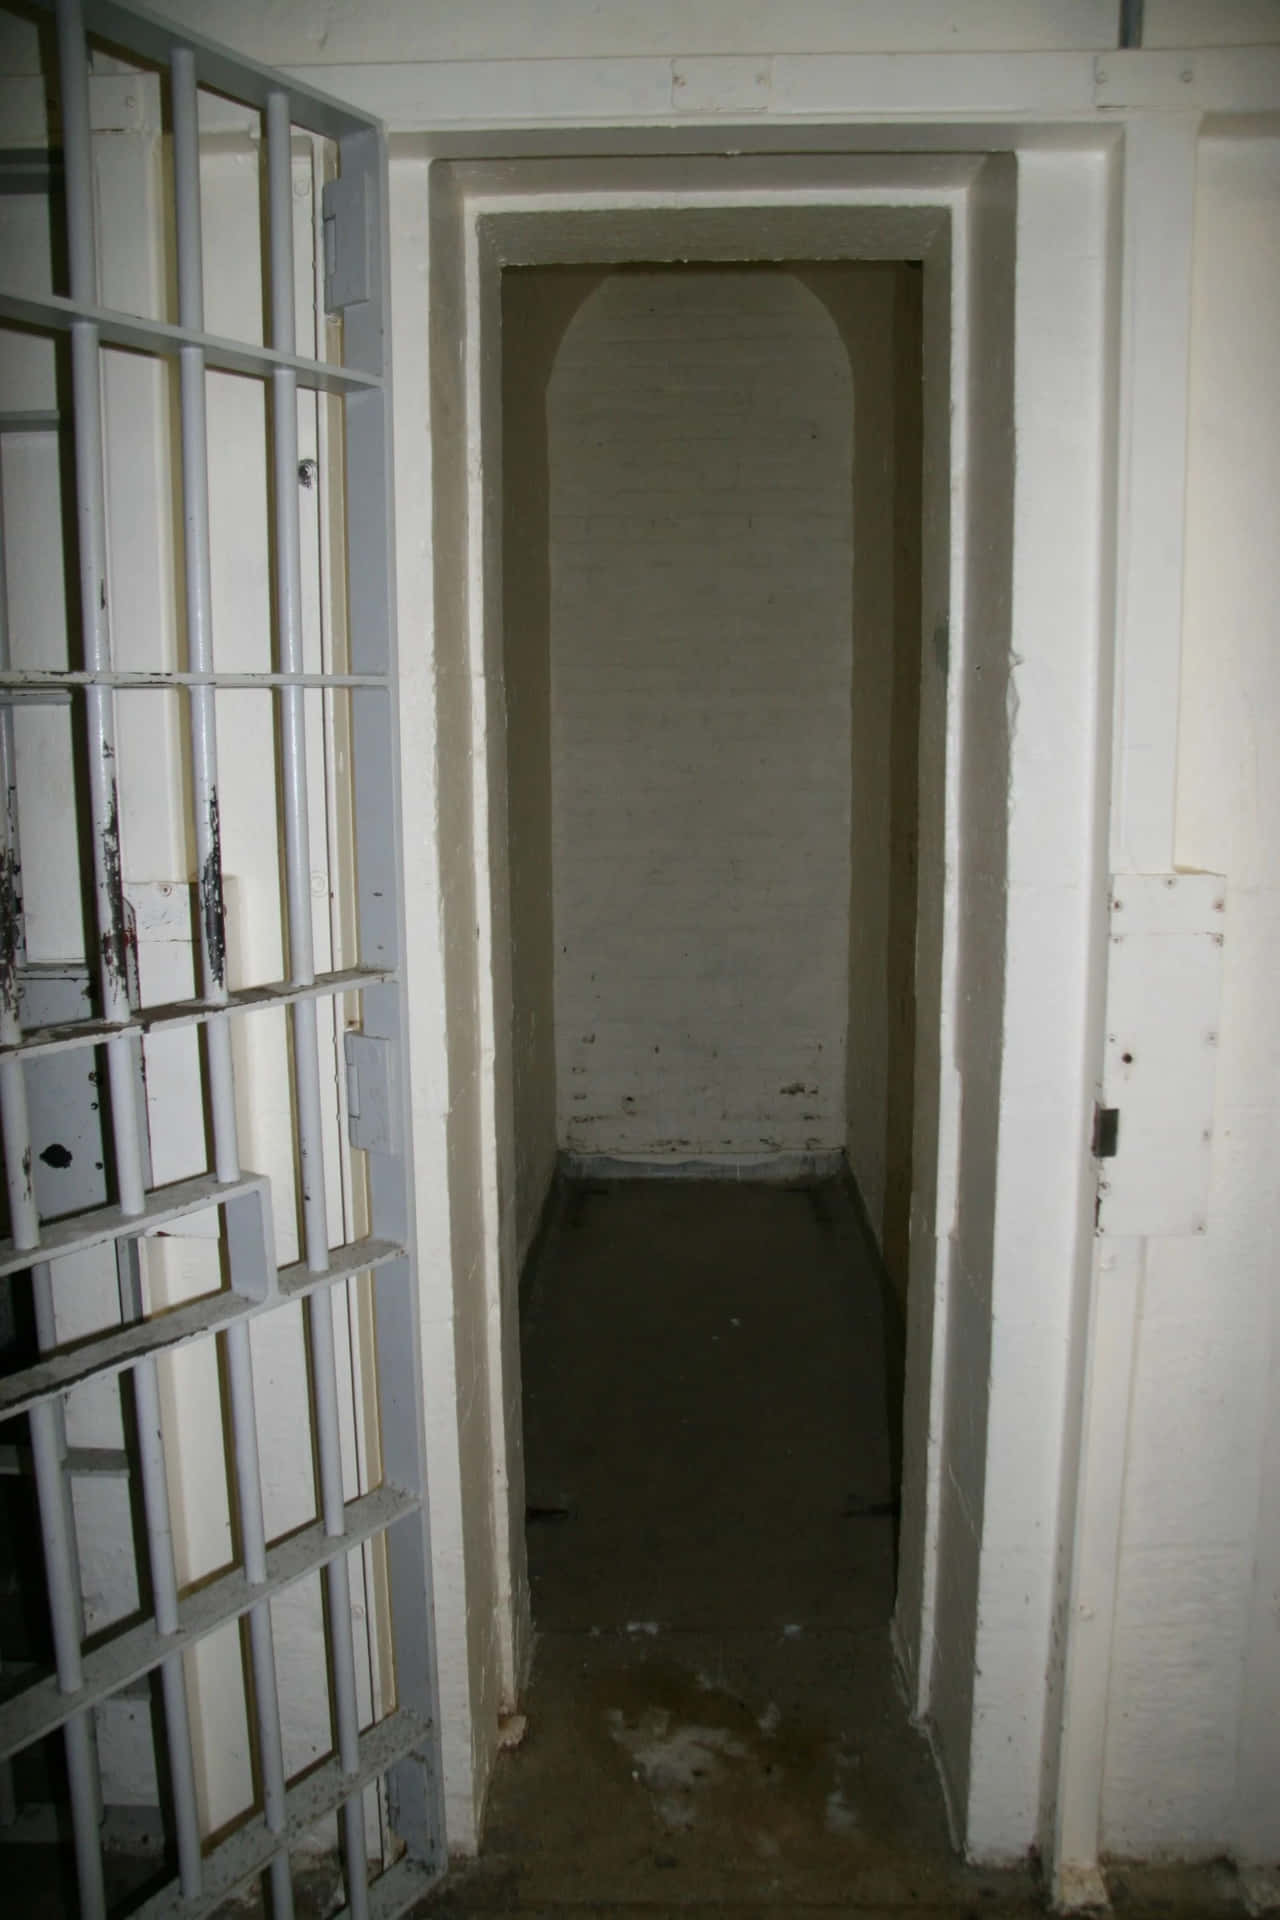 A Doorway In A Prison Cell